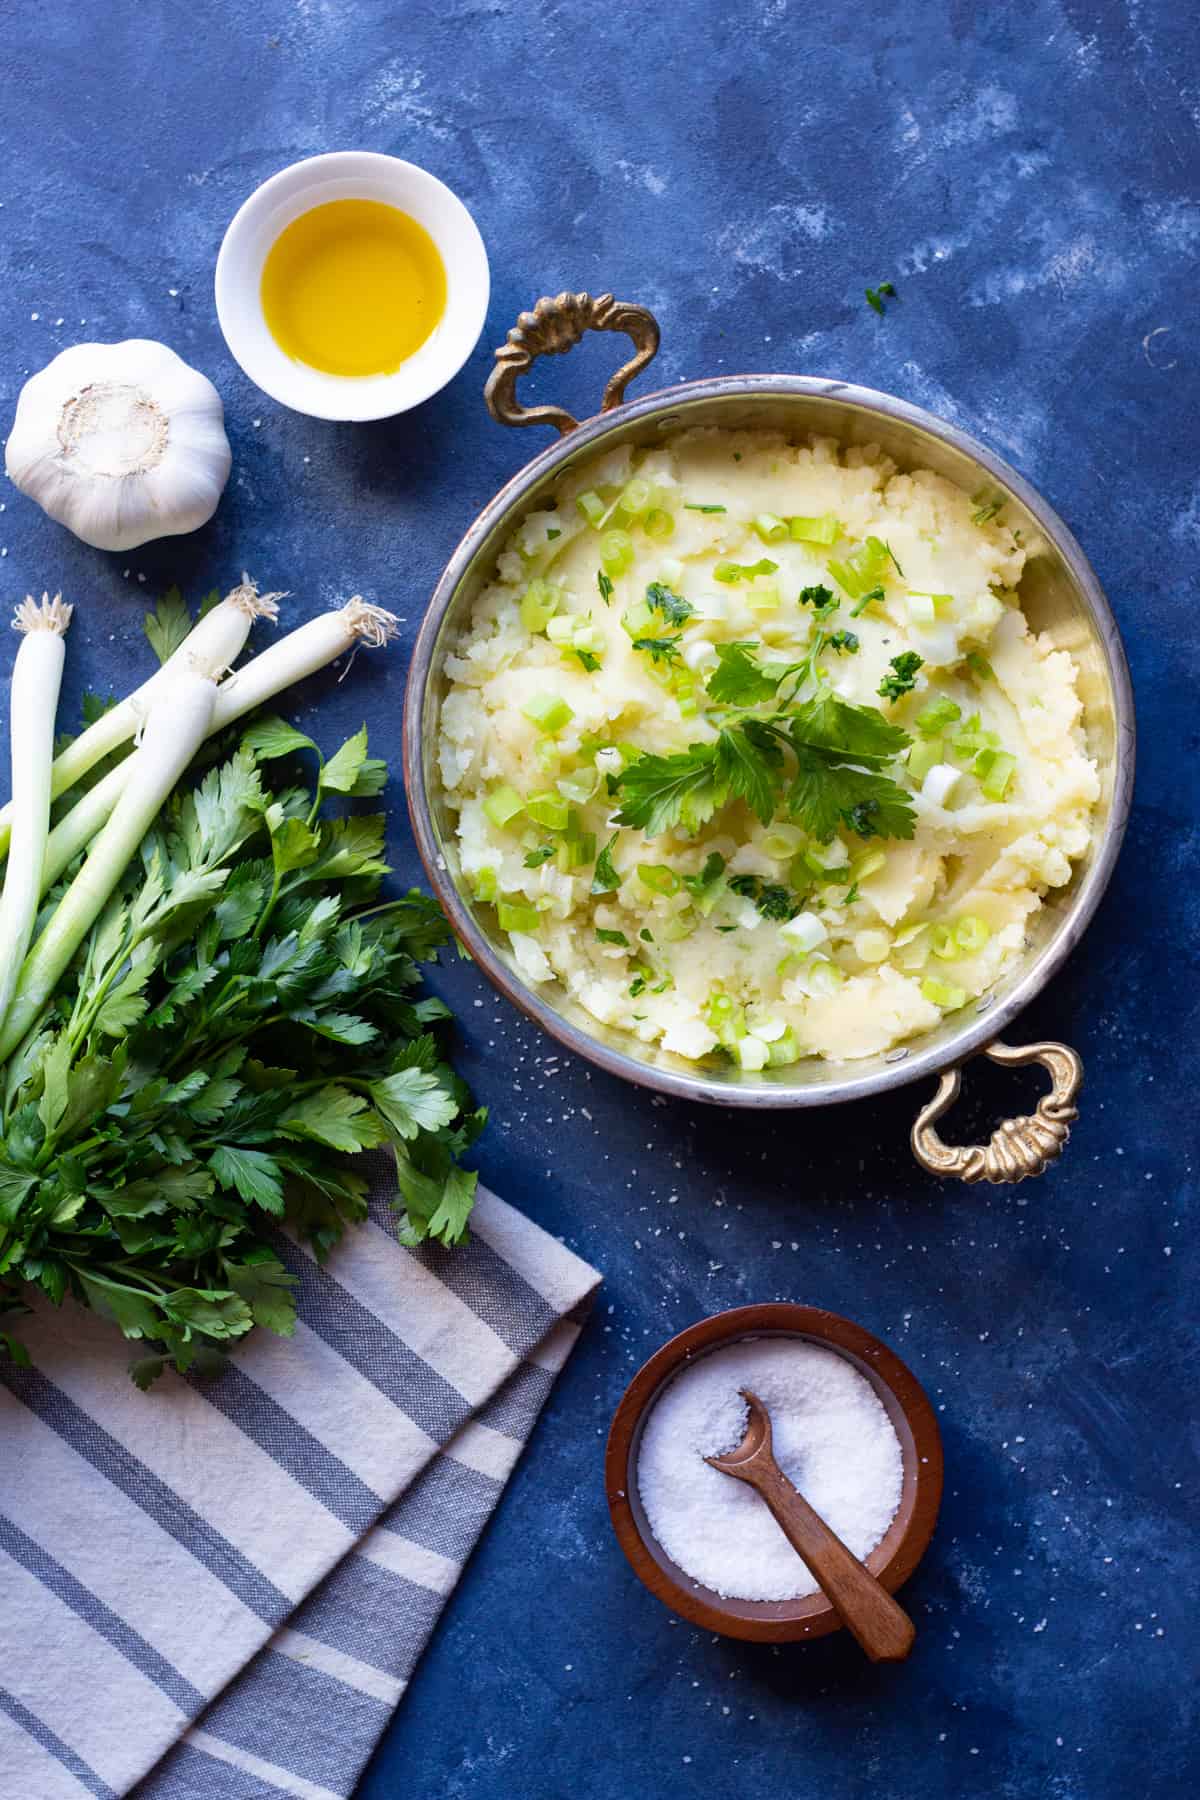 Skordalia is a popular potato and garlic dip that's creamy and so tasty. Watch the video to learn how to make this traditional Greek dip with just a few ingredients. 